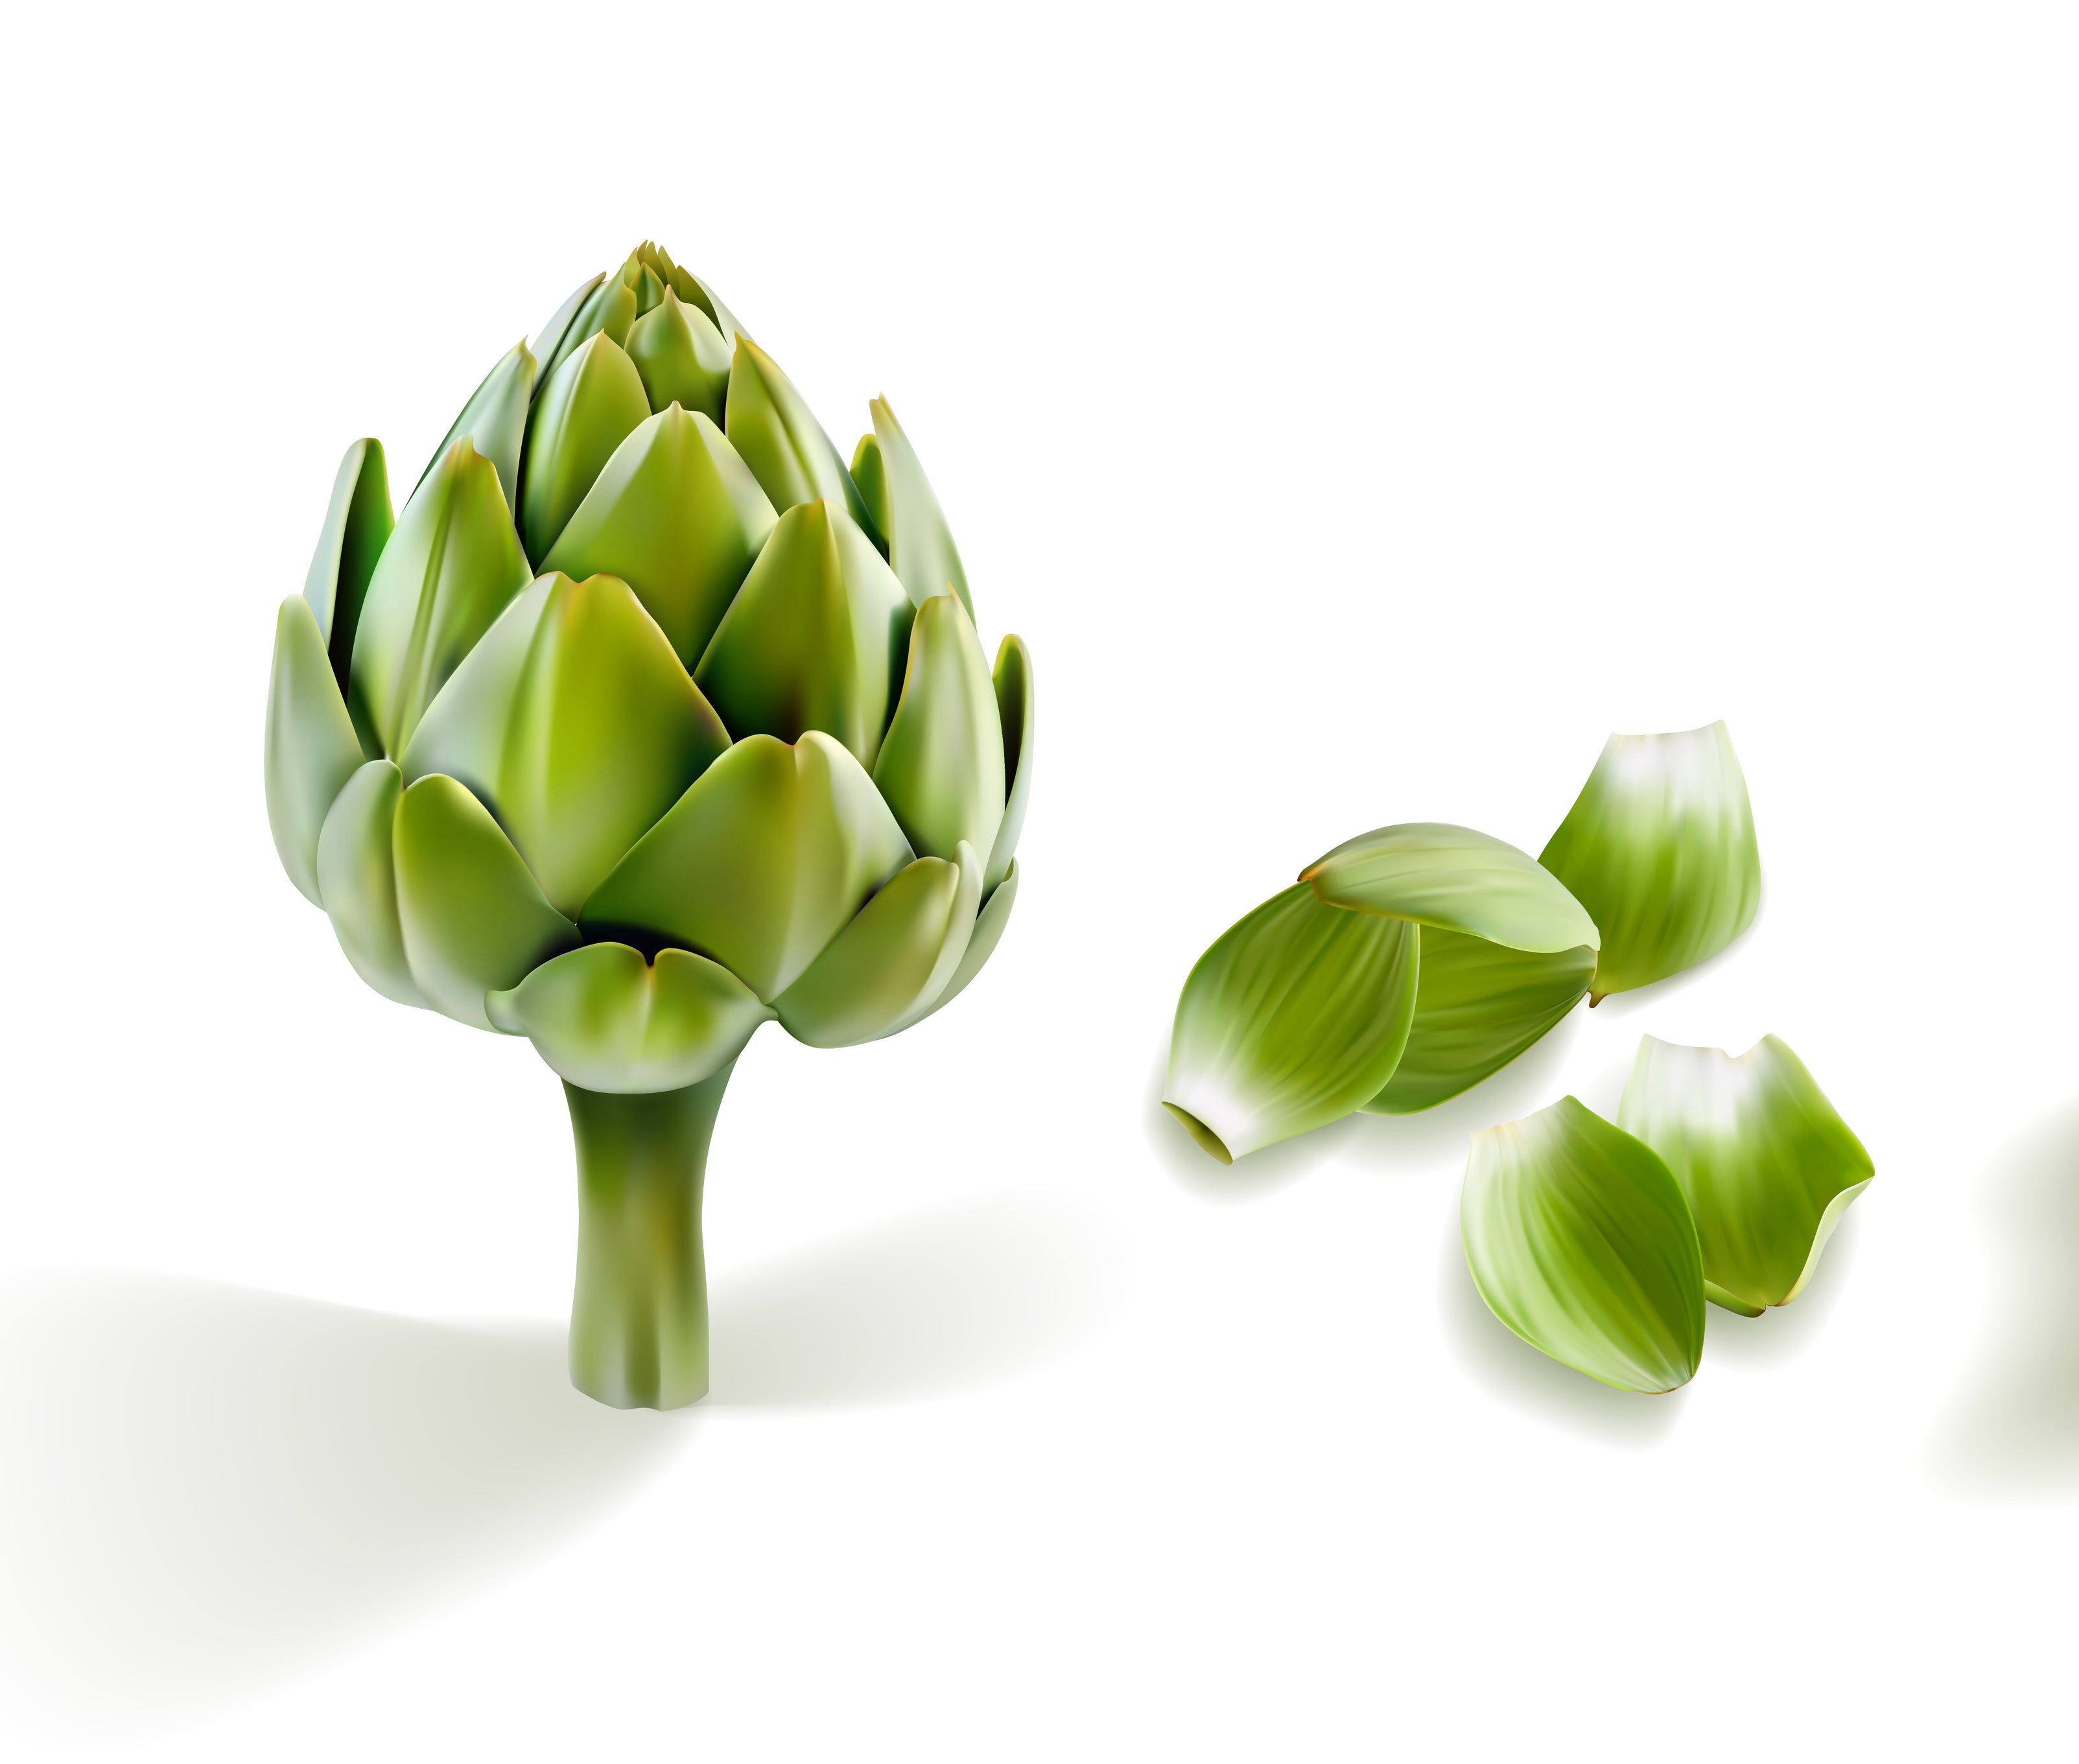 Artichoke Leaf: Nature's Digestive Aid and Liver Support